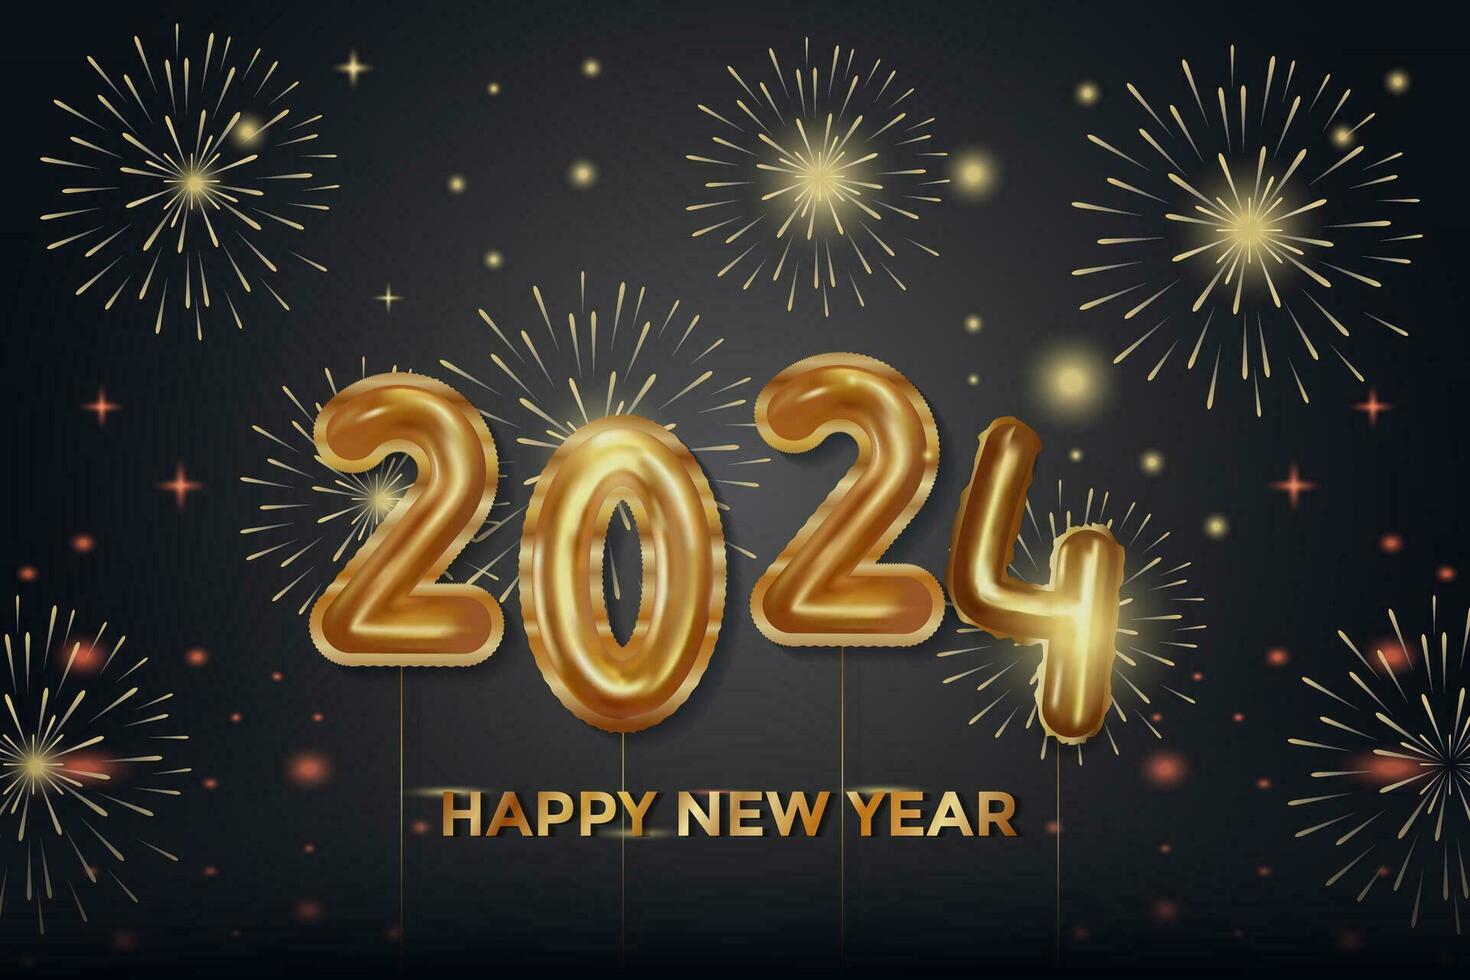 realistic happy new year 2024 with fireworks background illustration vector